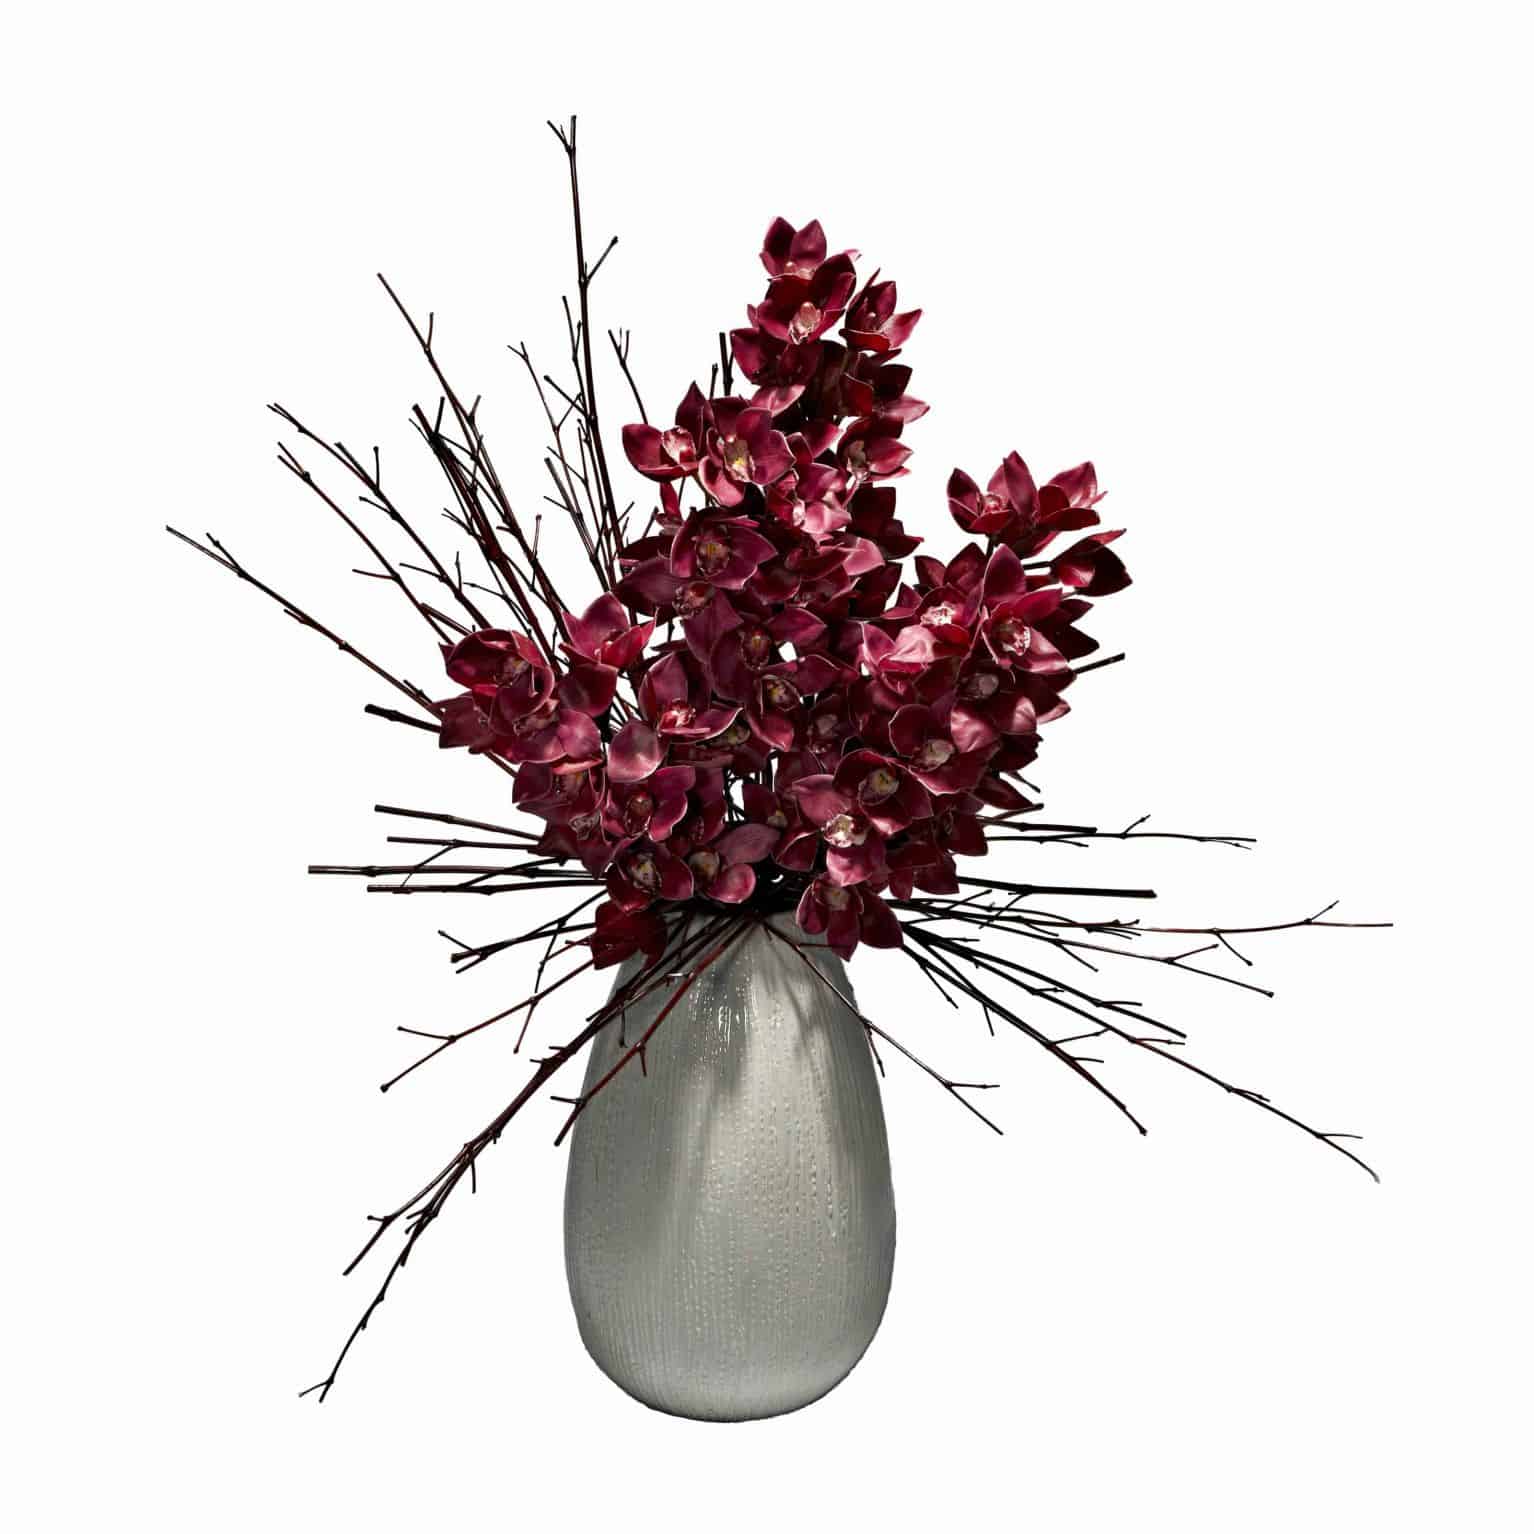 You'll love our minimalistic chic mauve silk flower cymbidium orchid in a white eggplant shaped ceramic vase. Effortless luxury artificial orchid stems.